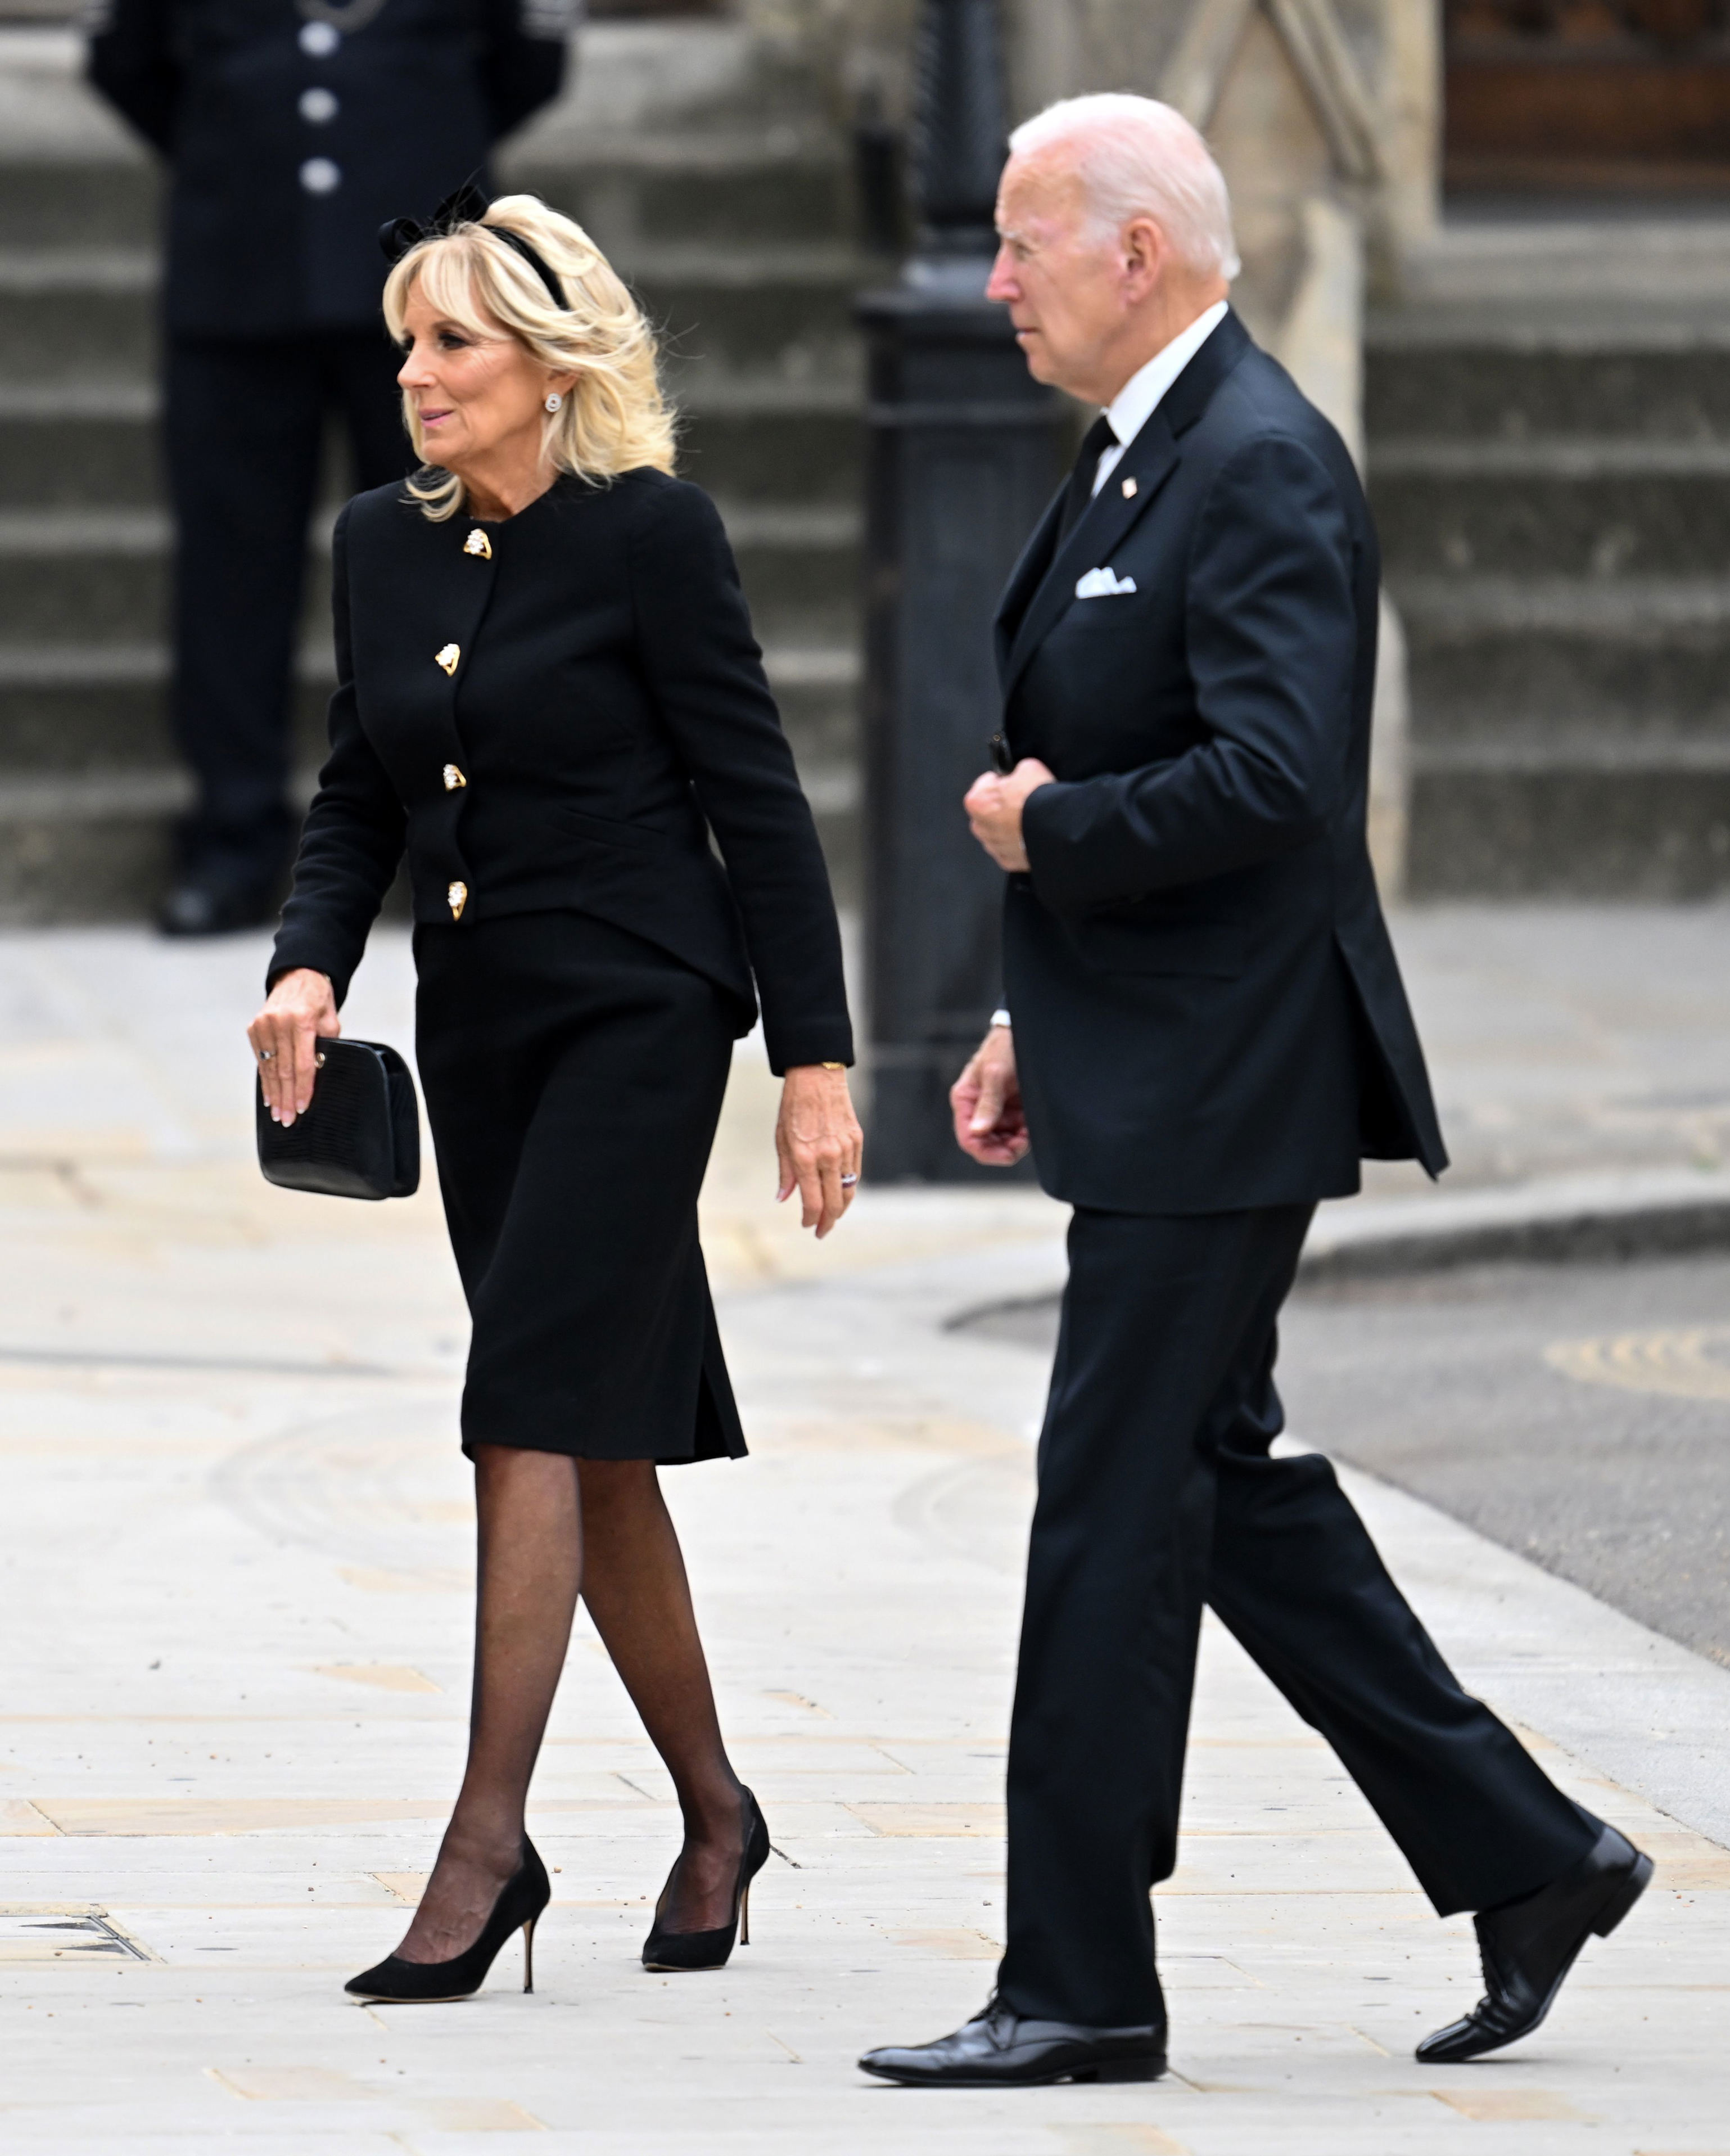 <p>U.S. President Joe Biden and first lady Jill Biden attended <a href="https://www.wonderwall.com/celebrity/royals/best-photos-from-queen-elizabeth-ii-funeral-king-charles-princes-william-prince-harry-george-charlotte-kate-meghan652347.gallery">the state funeral</a> of Queen Elizabeth II at Westminster Abbey in London on Sept. 19, 2022.</p>